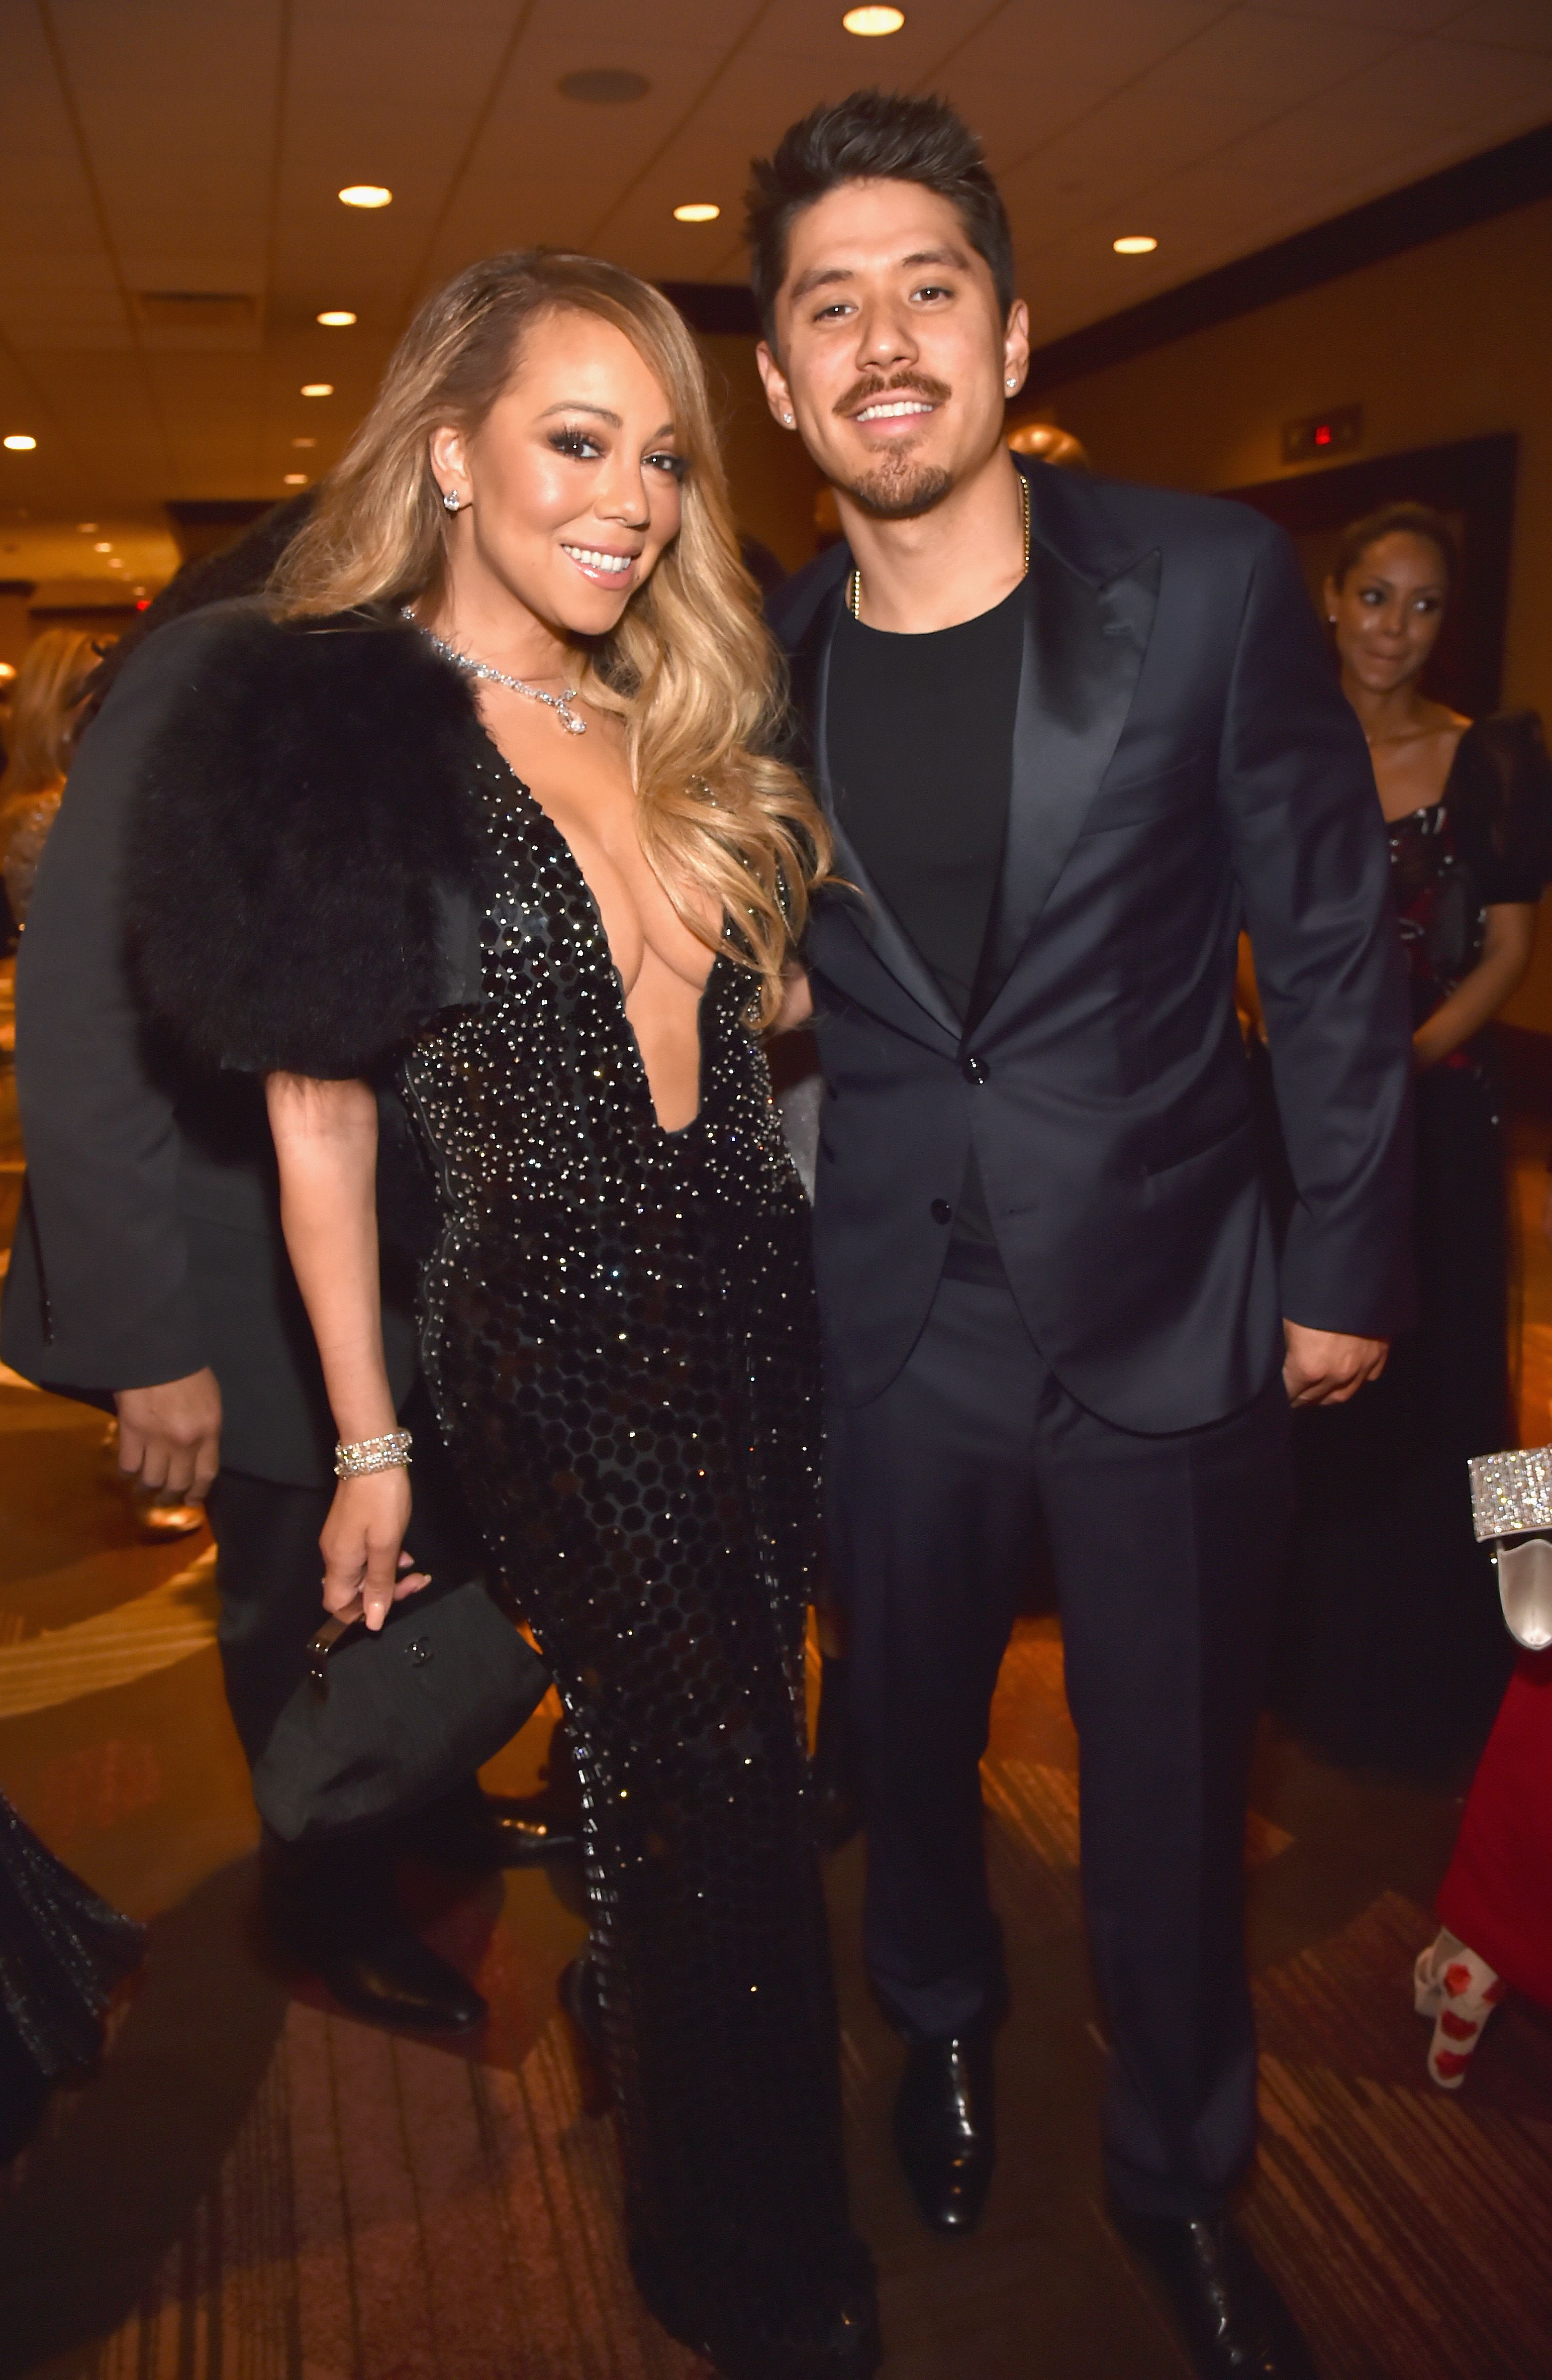 Everything You Need To Know About Mariah Carey’s Boyfriend, Bryan Tanaka